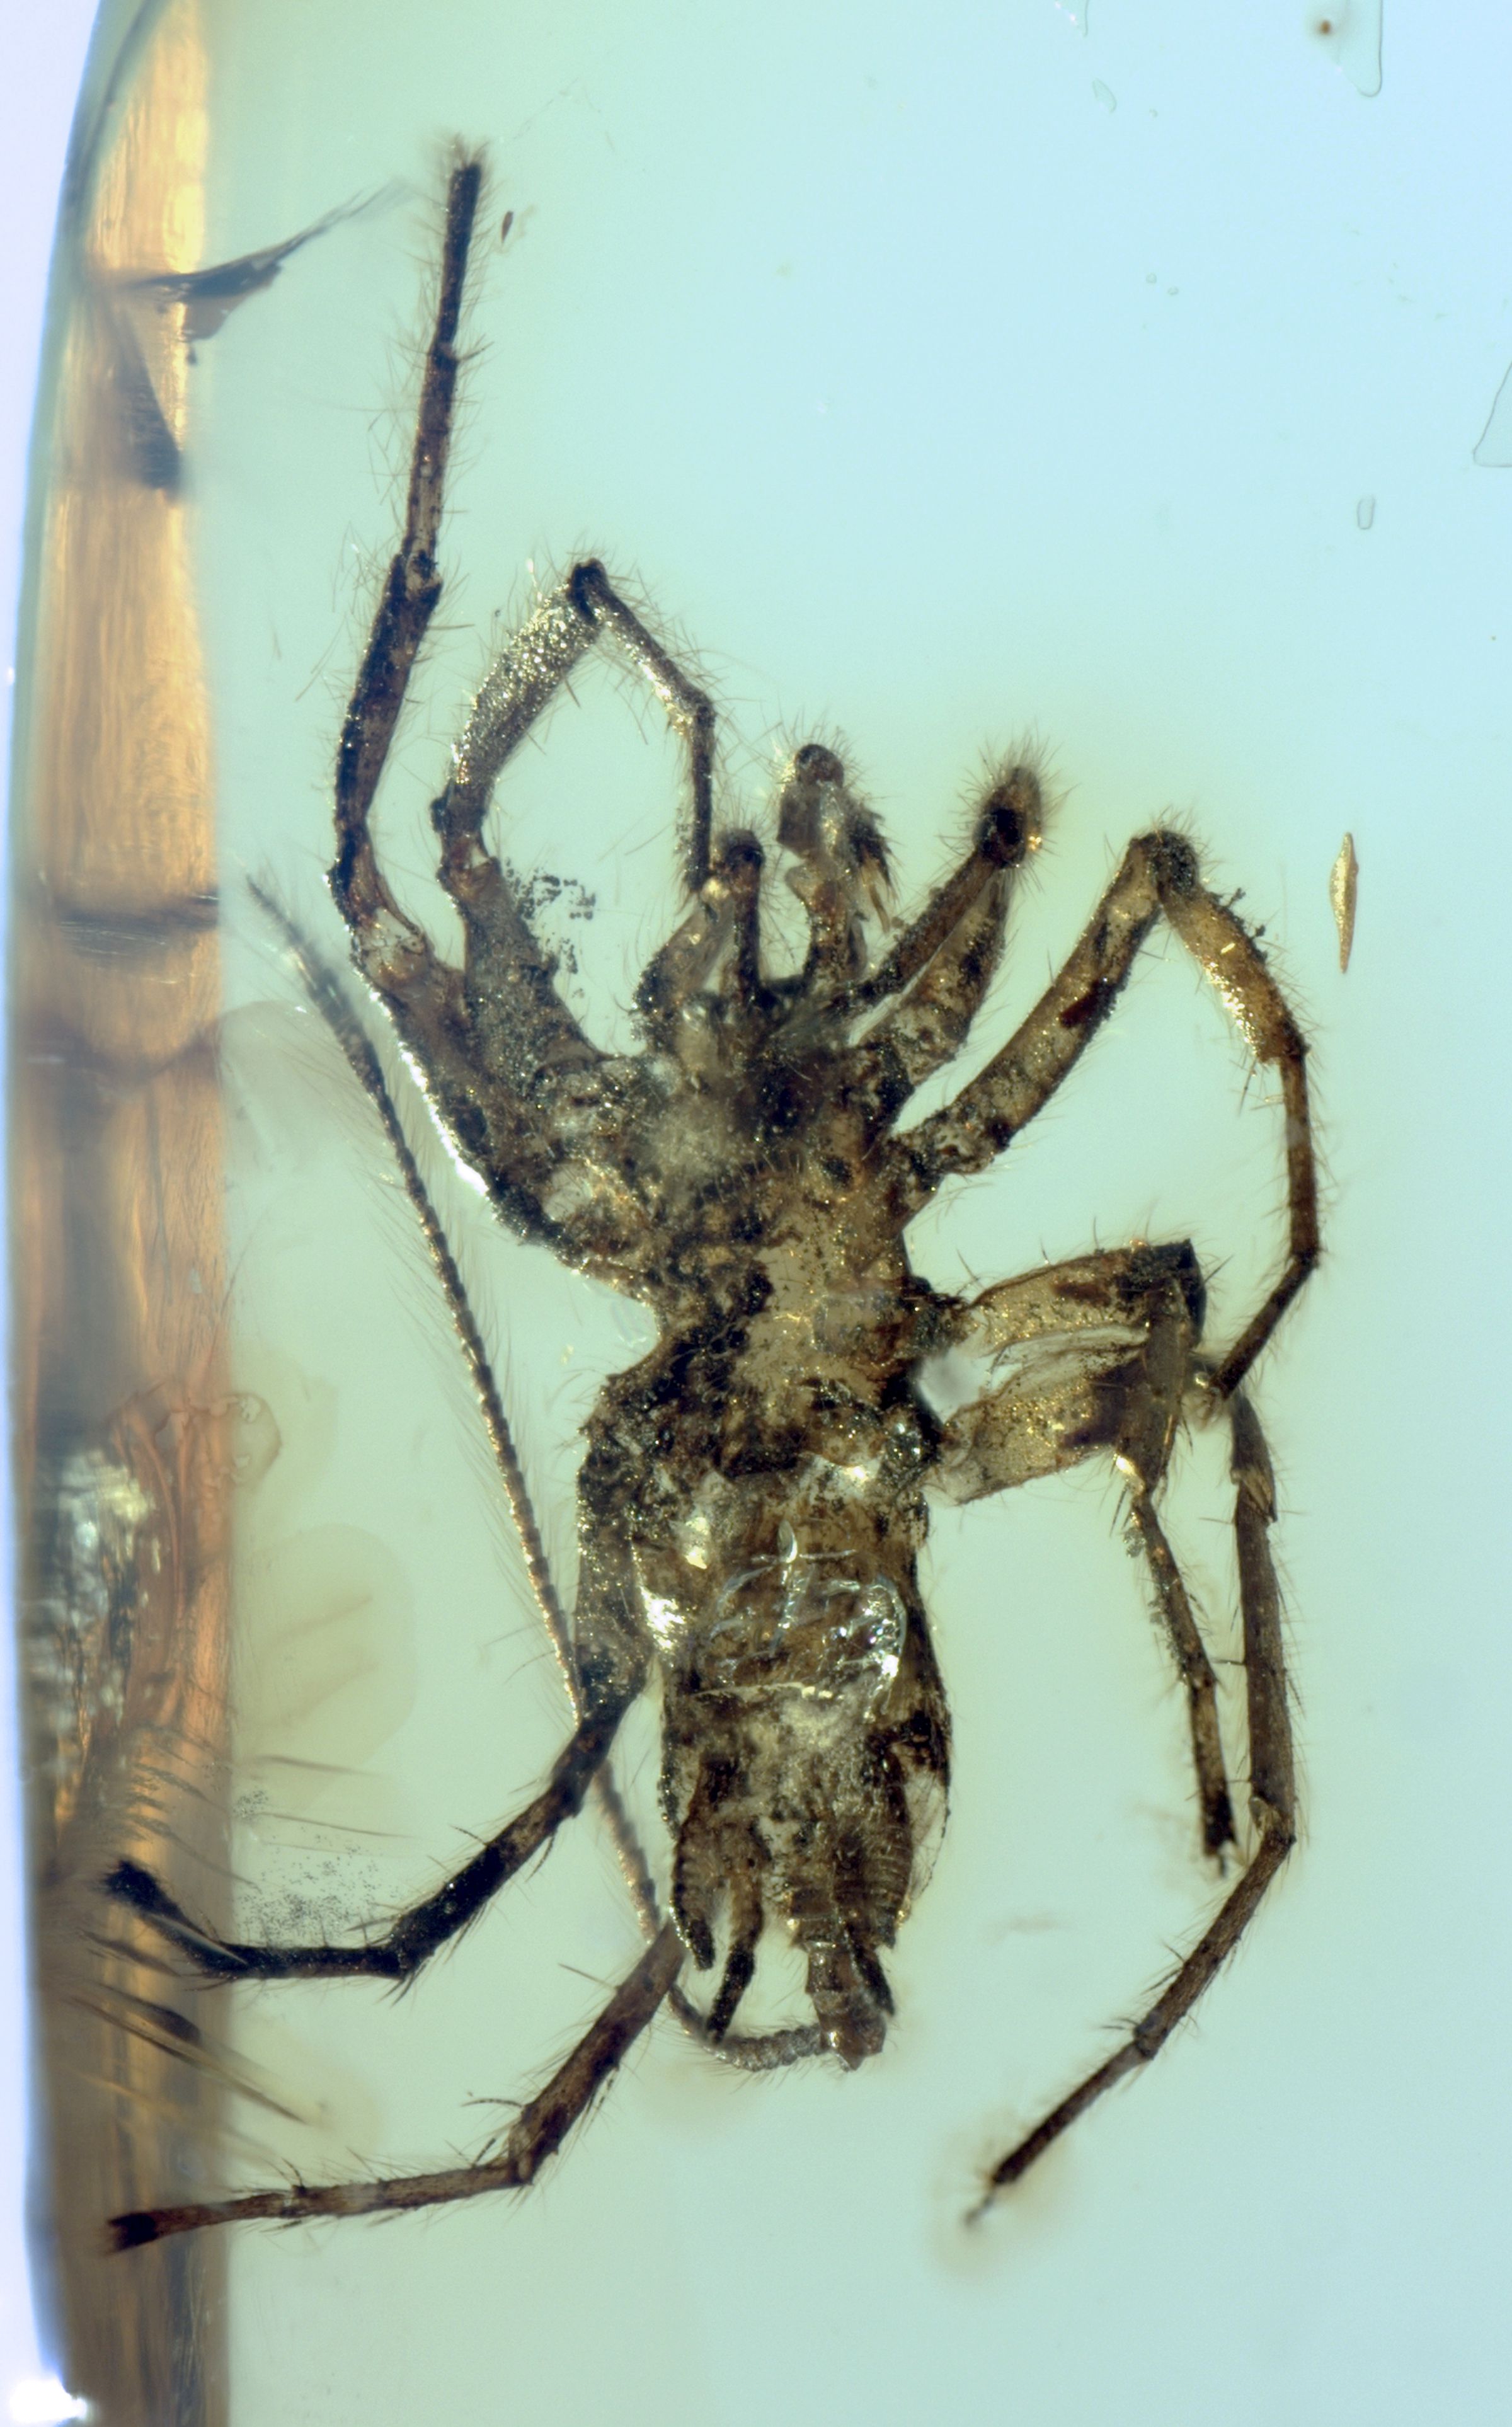 The specimens had spinnerets, or silk-spinning organs, jutting from the bottom of their abdomens —&nbsp;a feature they share with modern-day spiders. 